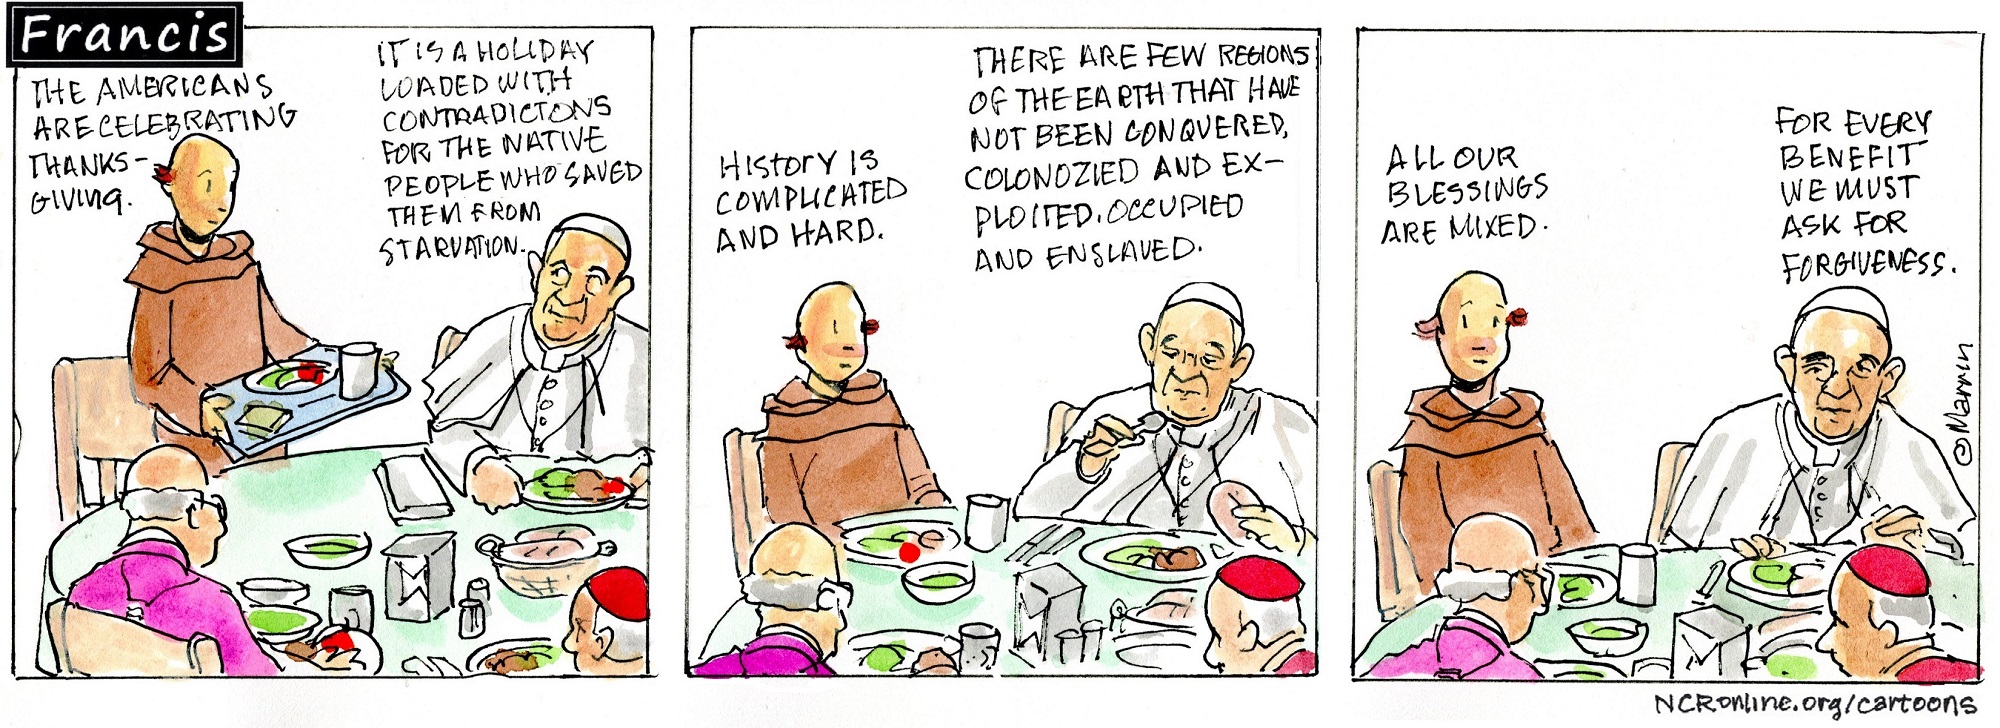 Francis, the comic strip: Brother Leo and Francis discuss the complicated history of America's holiday.